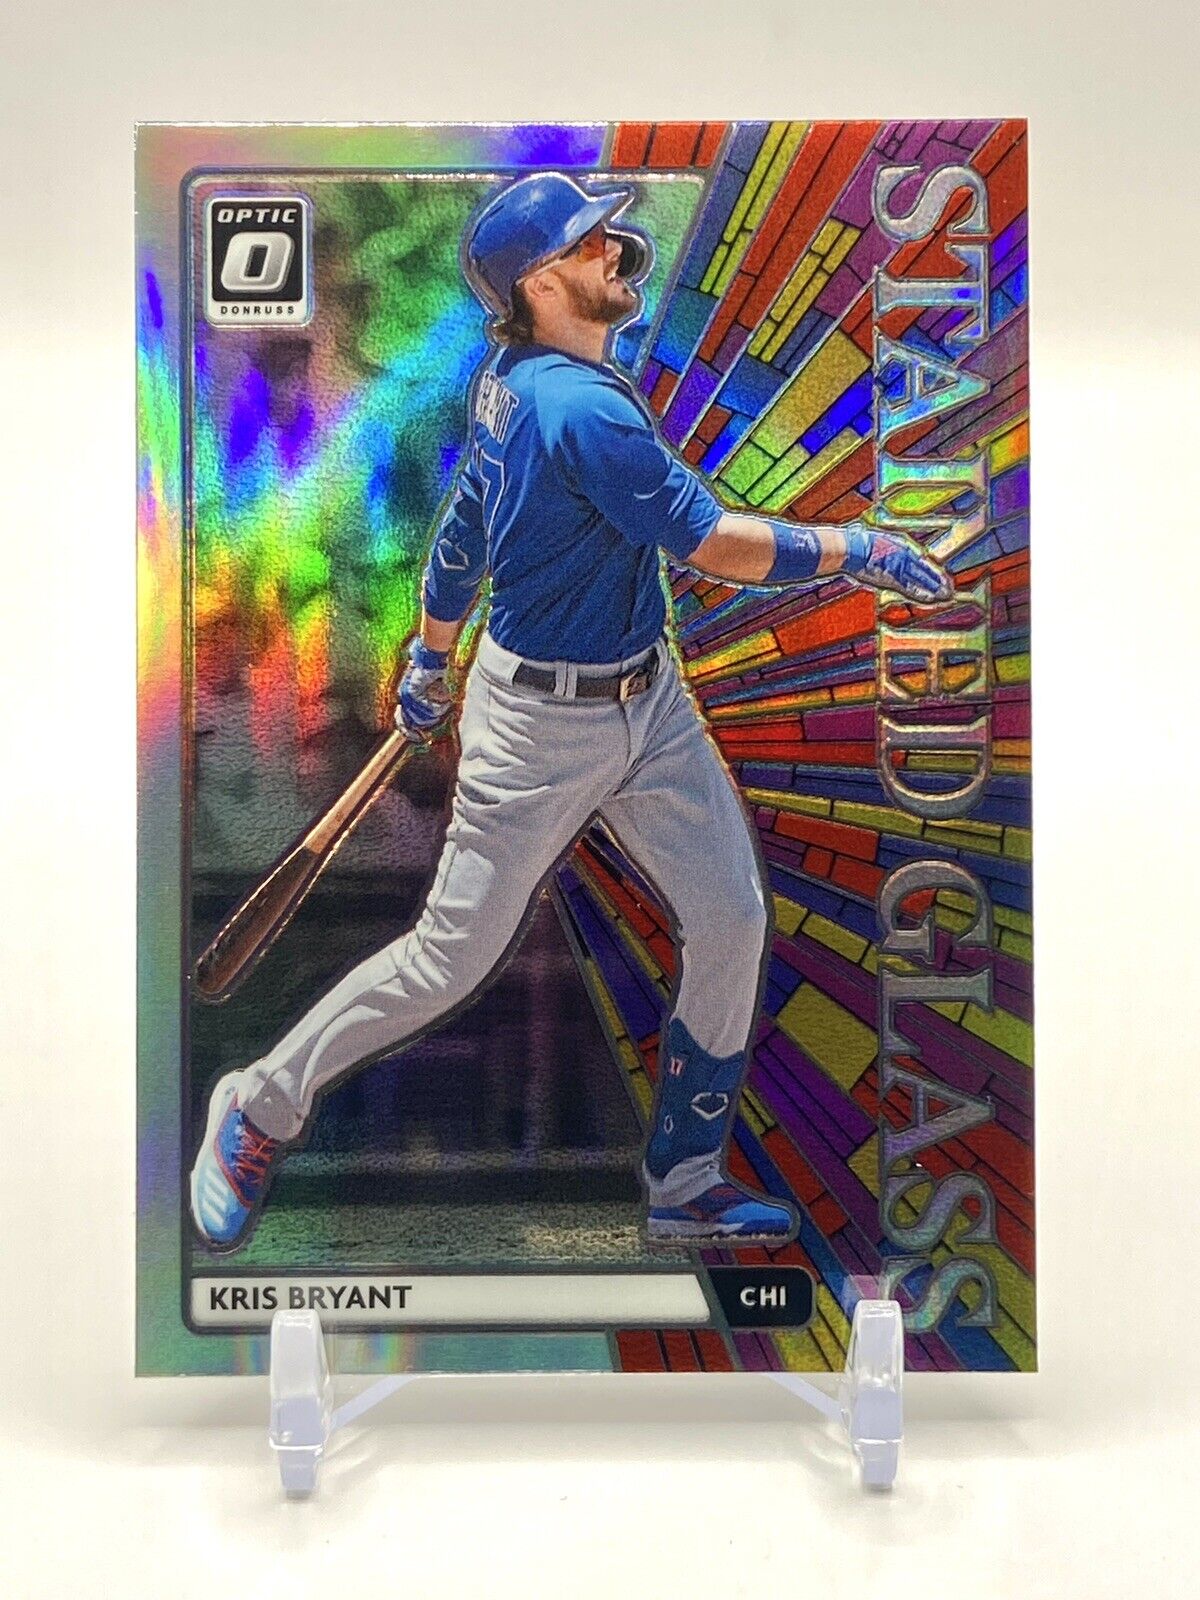 Kris Bryant 2020 Donruss Optic Stained Glass Holo Baseball Card #15